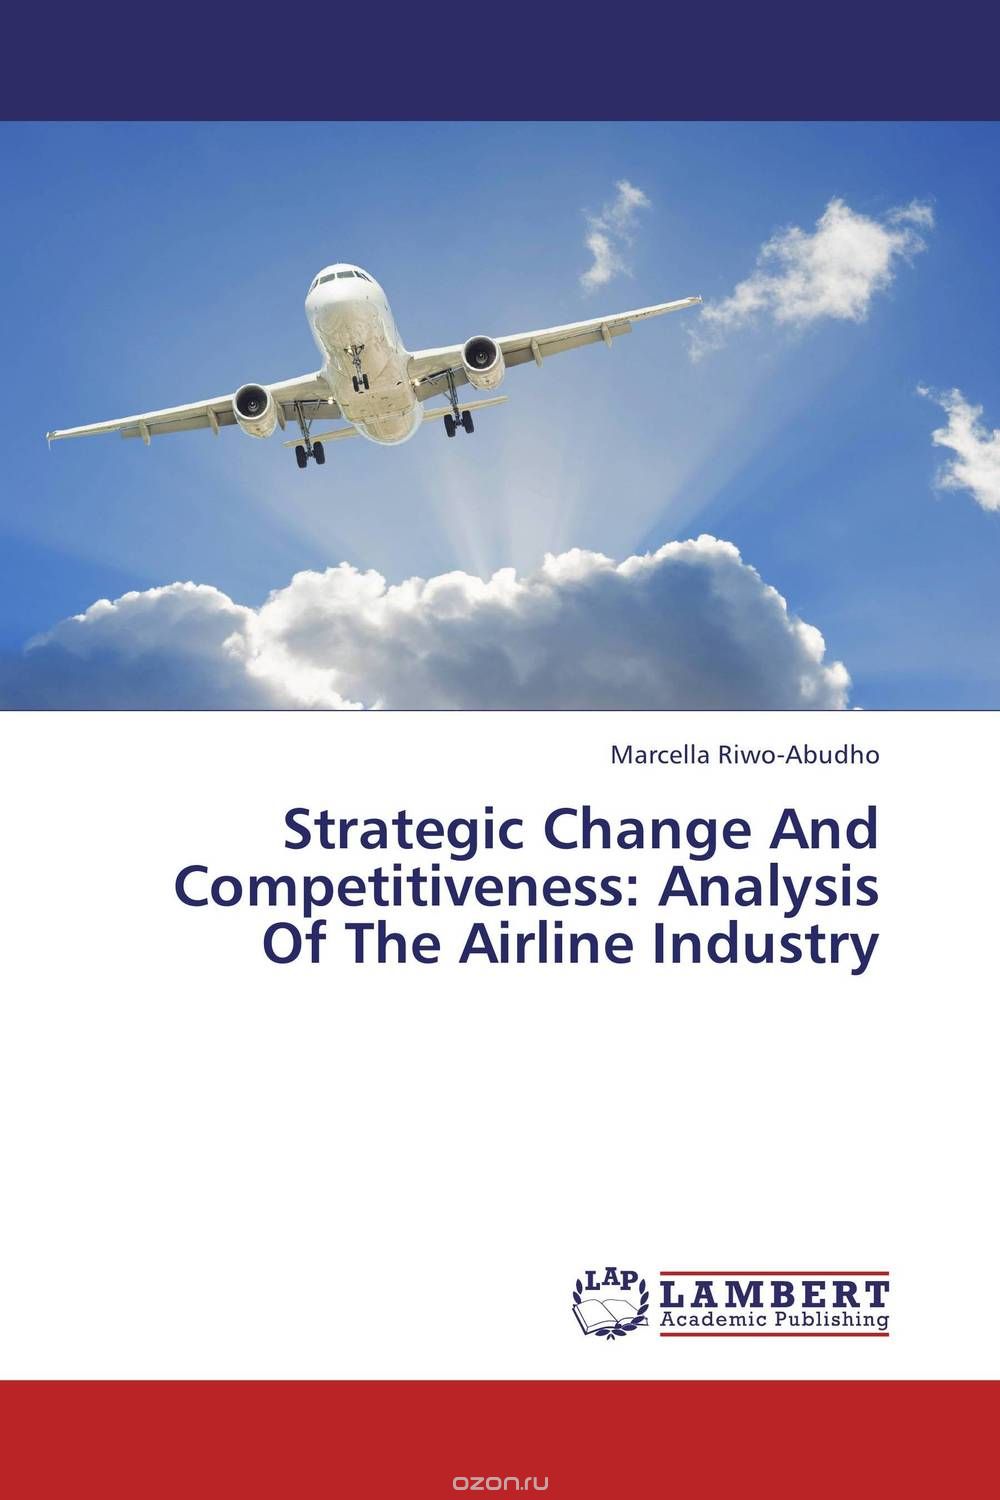 Скачать книгу "Strategic Change And Competitiveness: Analysis Of The Airline Industry"